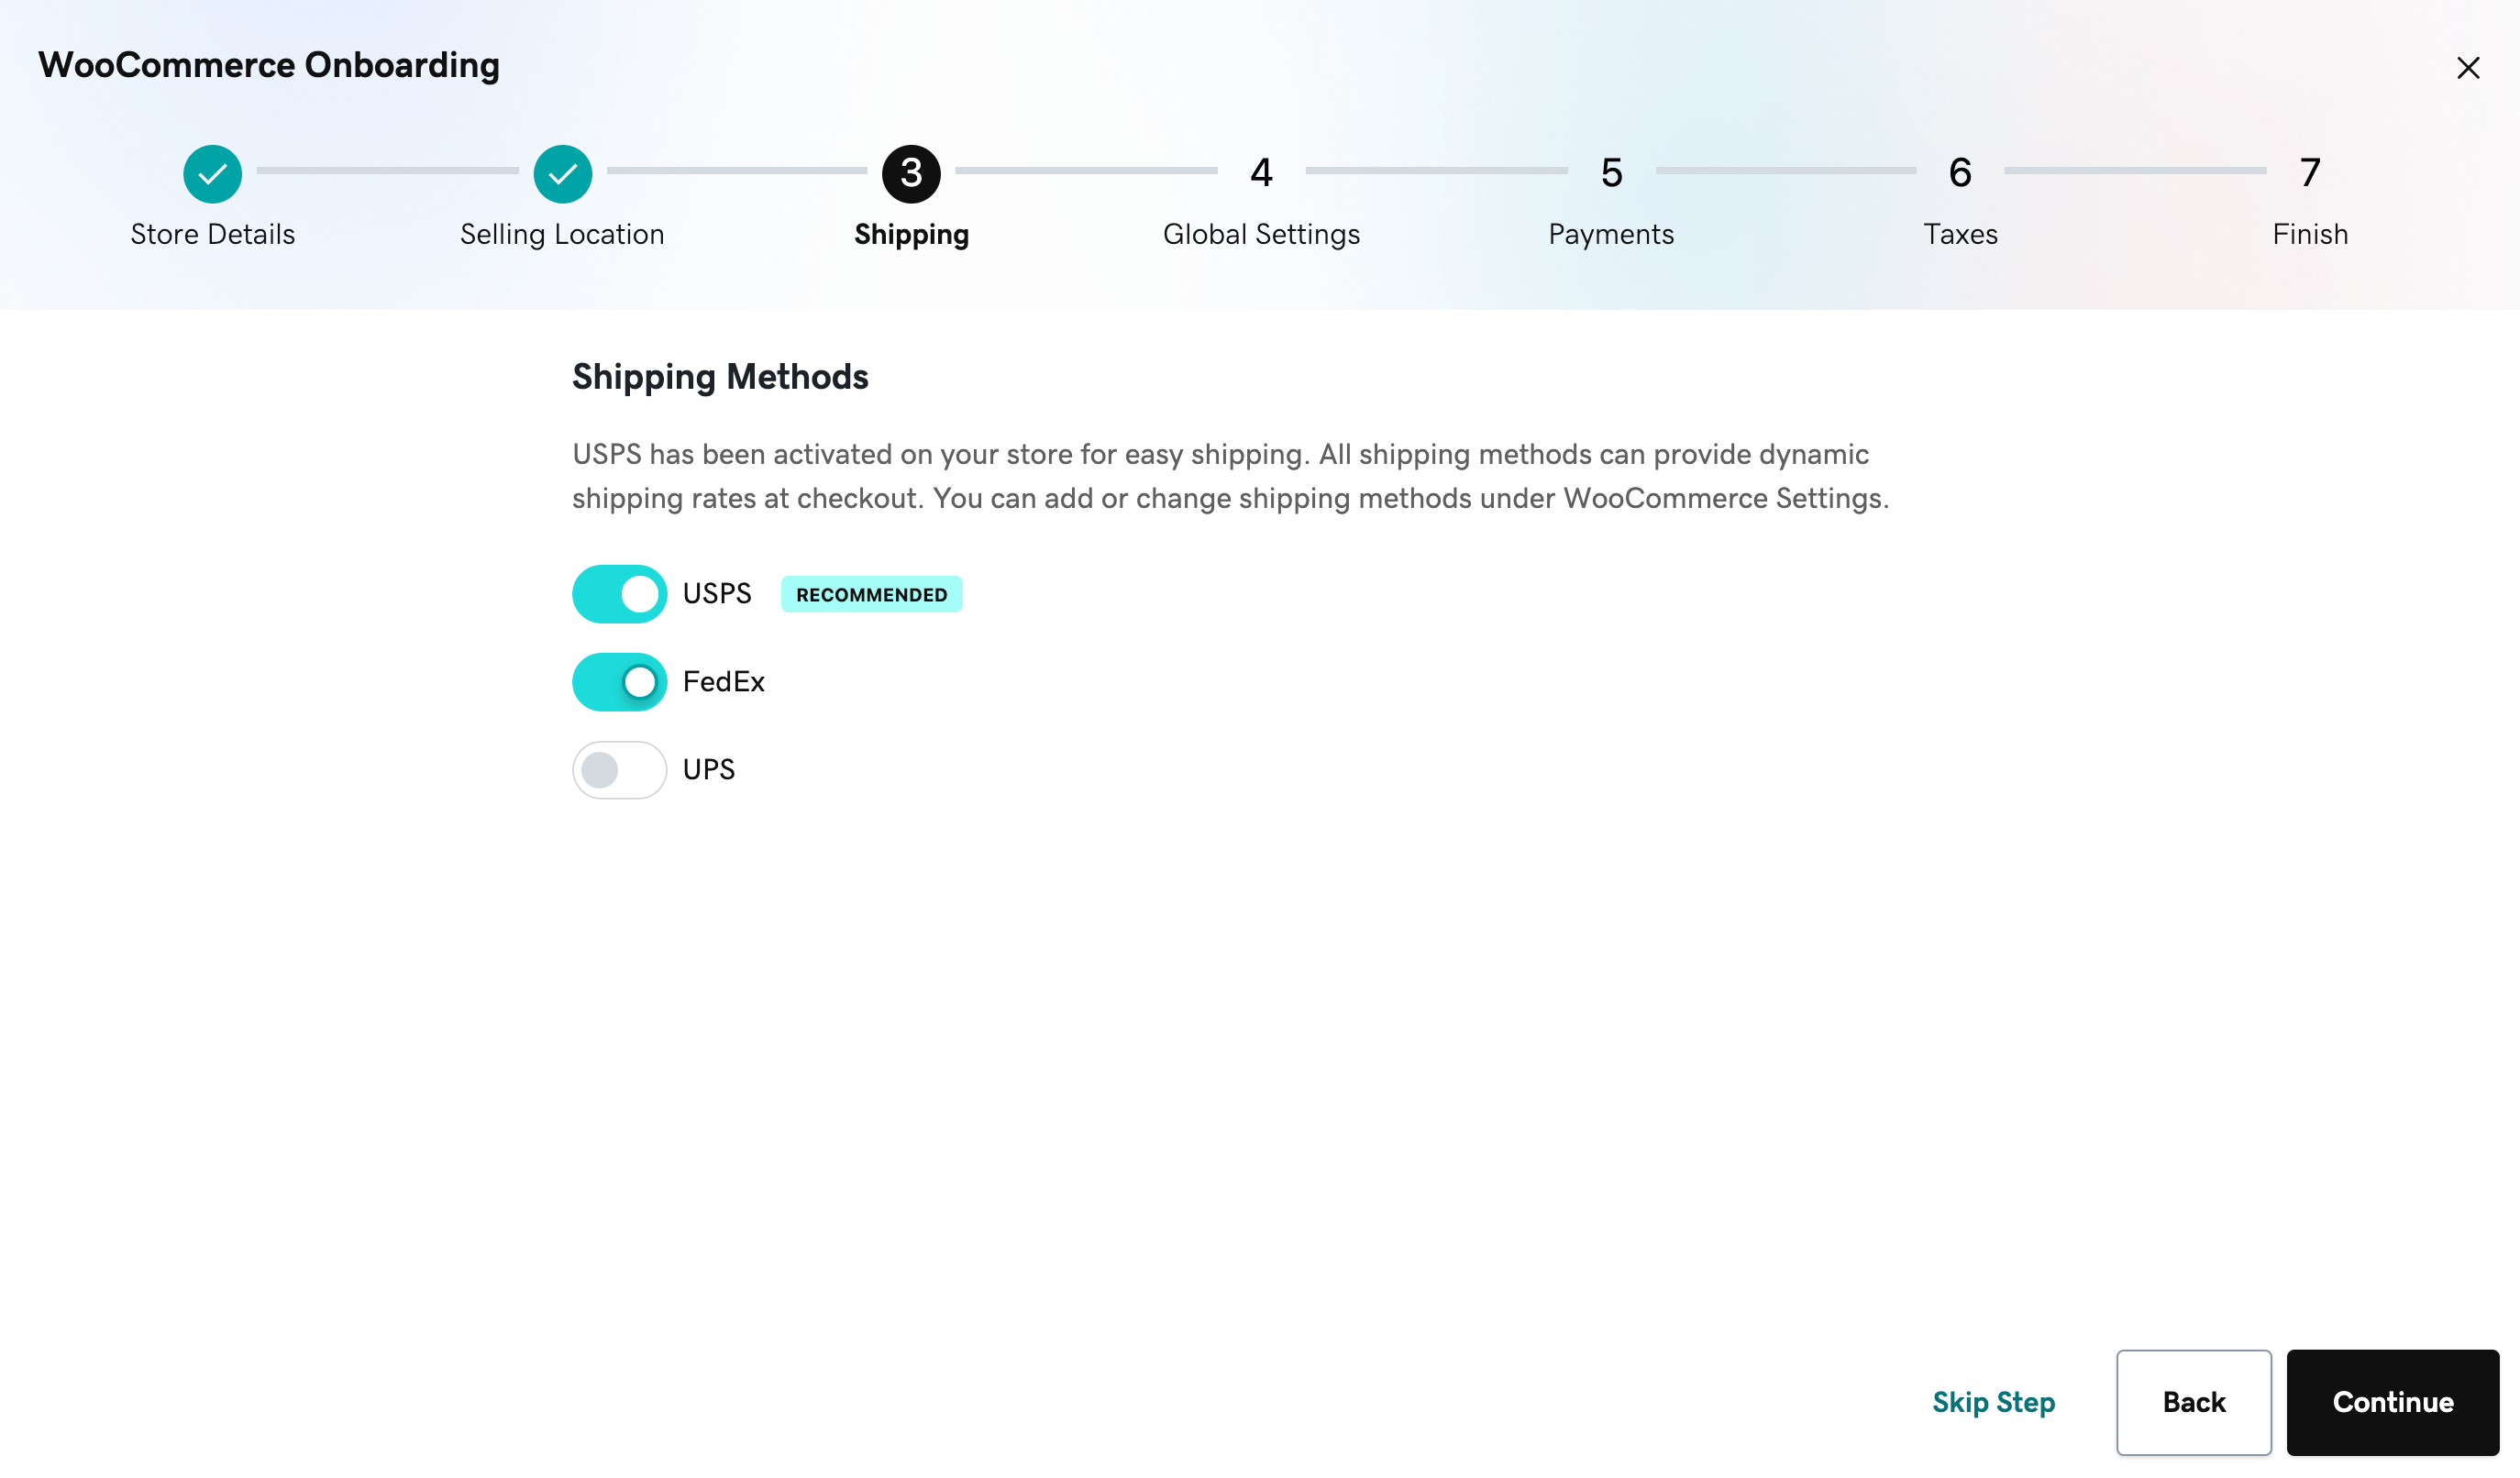 Options to enable shipping methods for merchants using the onboarding wizard